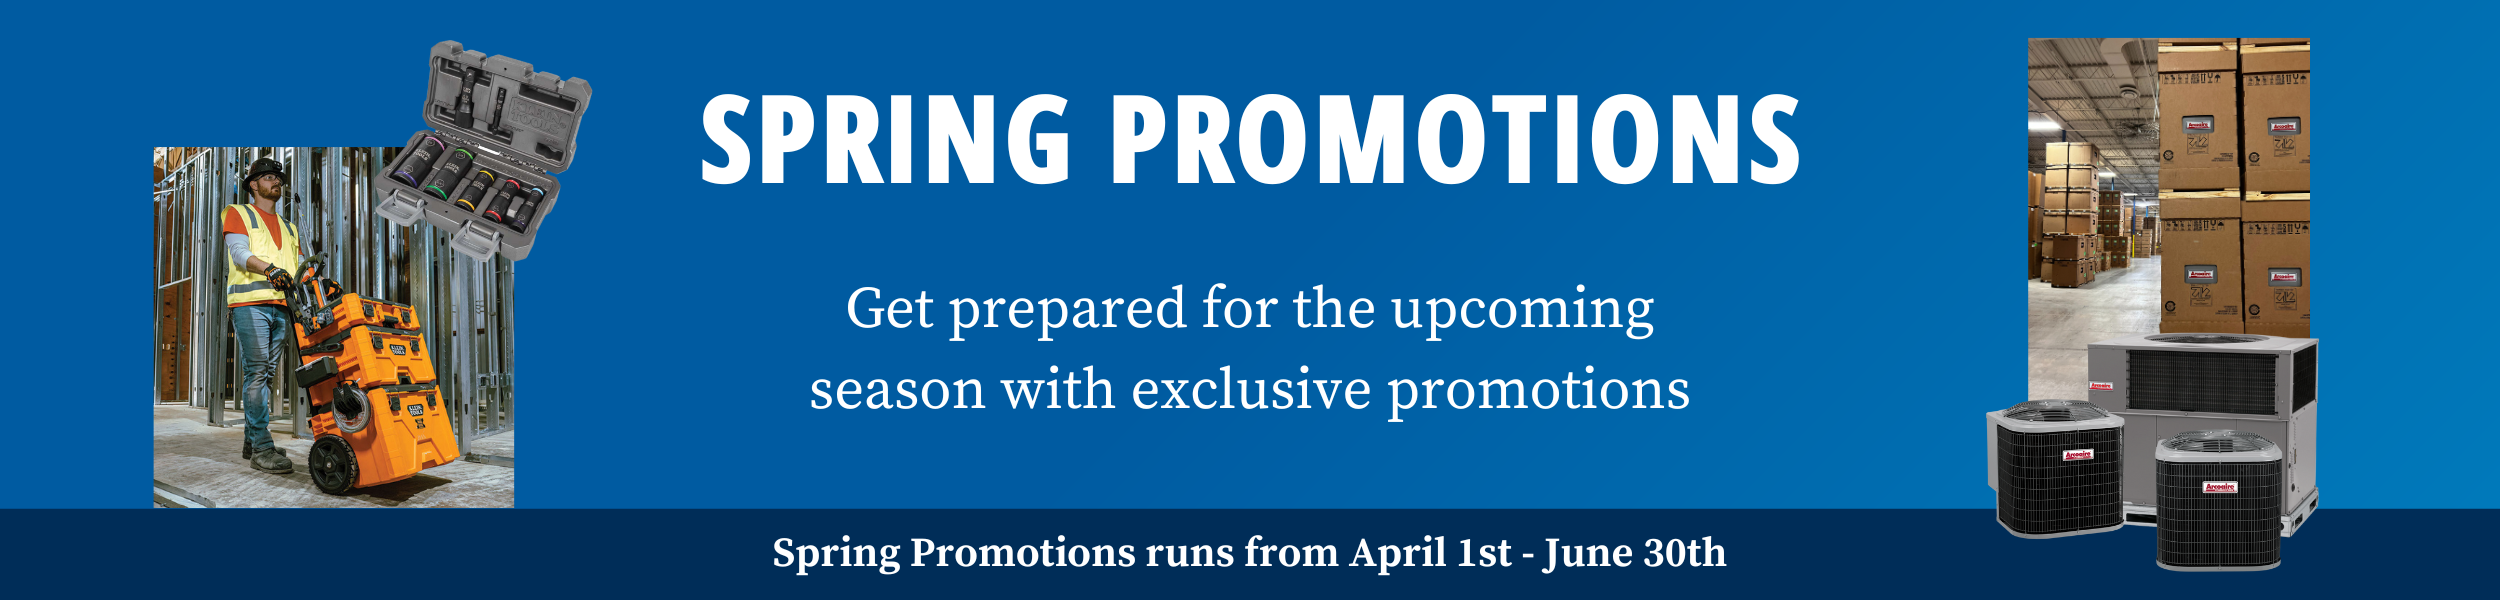 Graphic showing txt of "Spring Promotions get prepared for the upcoming season with exclusive promotions. Spring promotions runs from April 1st - June 30th." With two images, one is of a Klein Tools Modbox and another of Arcoaire HVAC units in a warehouse